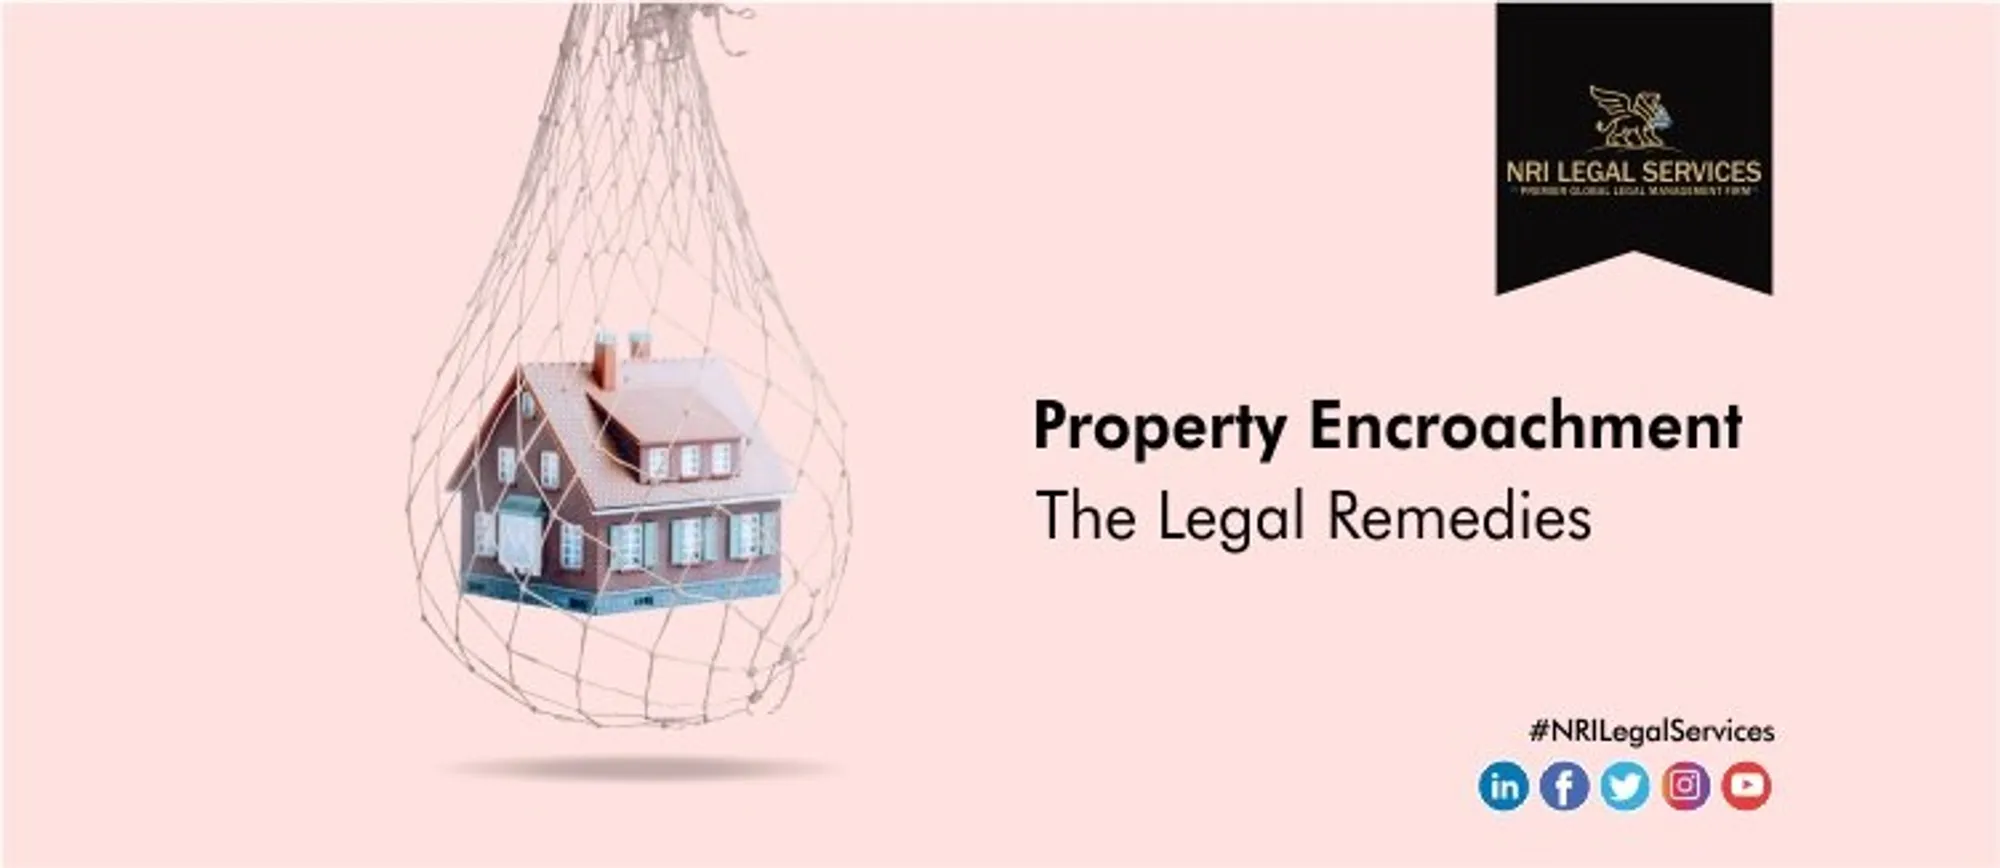 Property encroachment by the neighbor – the legal remedies